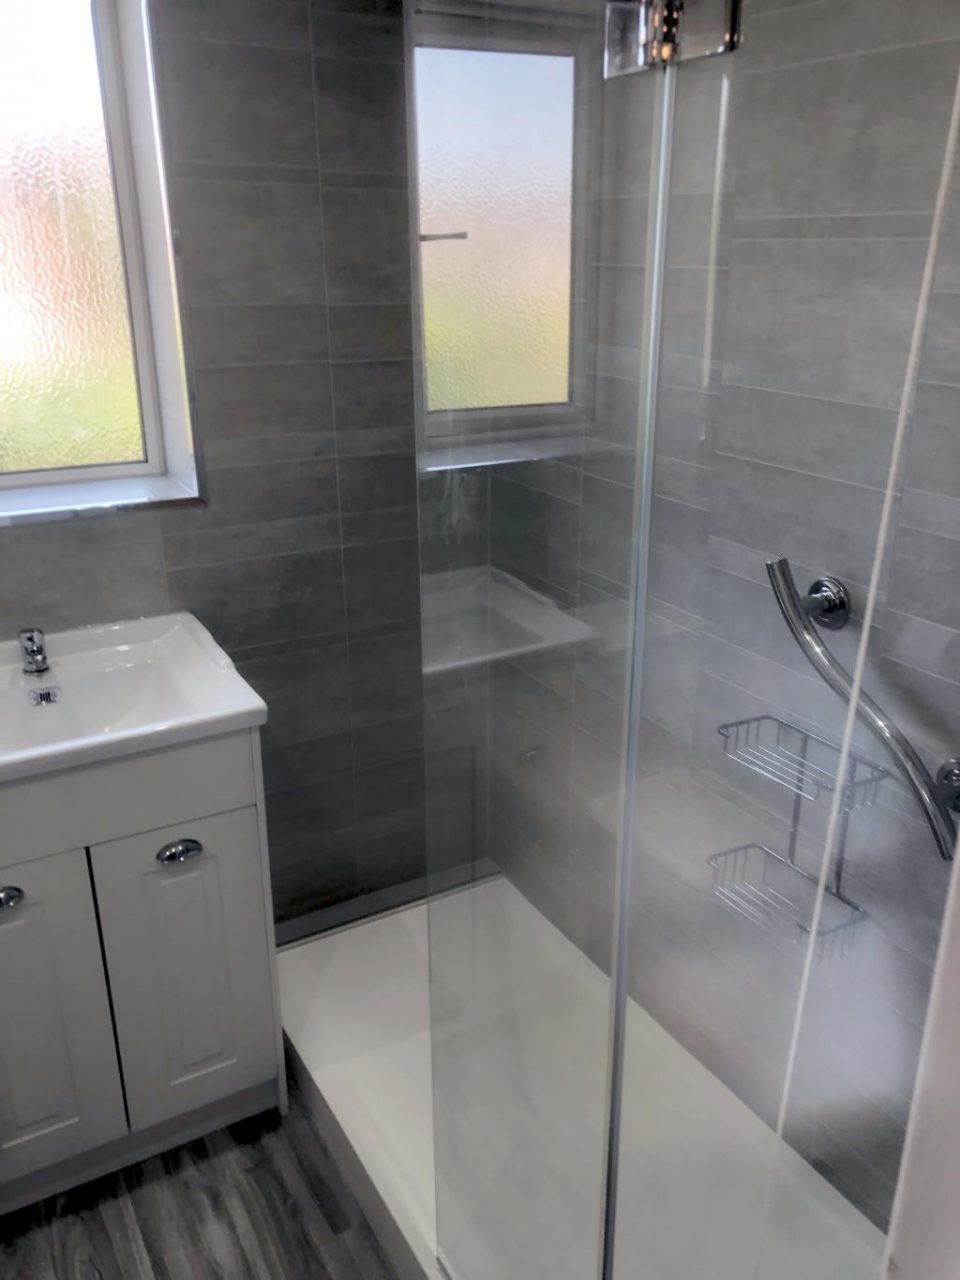 Replace Bath with Walk in Shower Plumber installer in Birmingham B36 for Yvonne